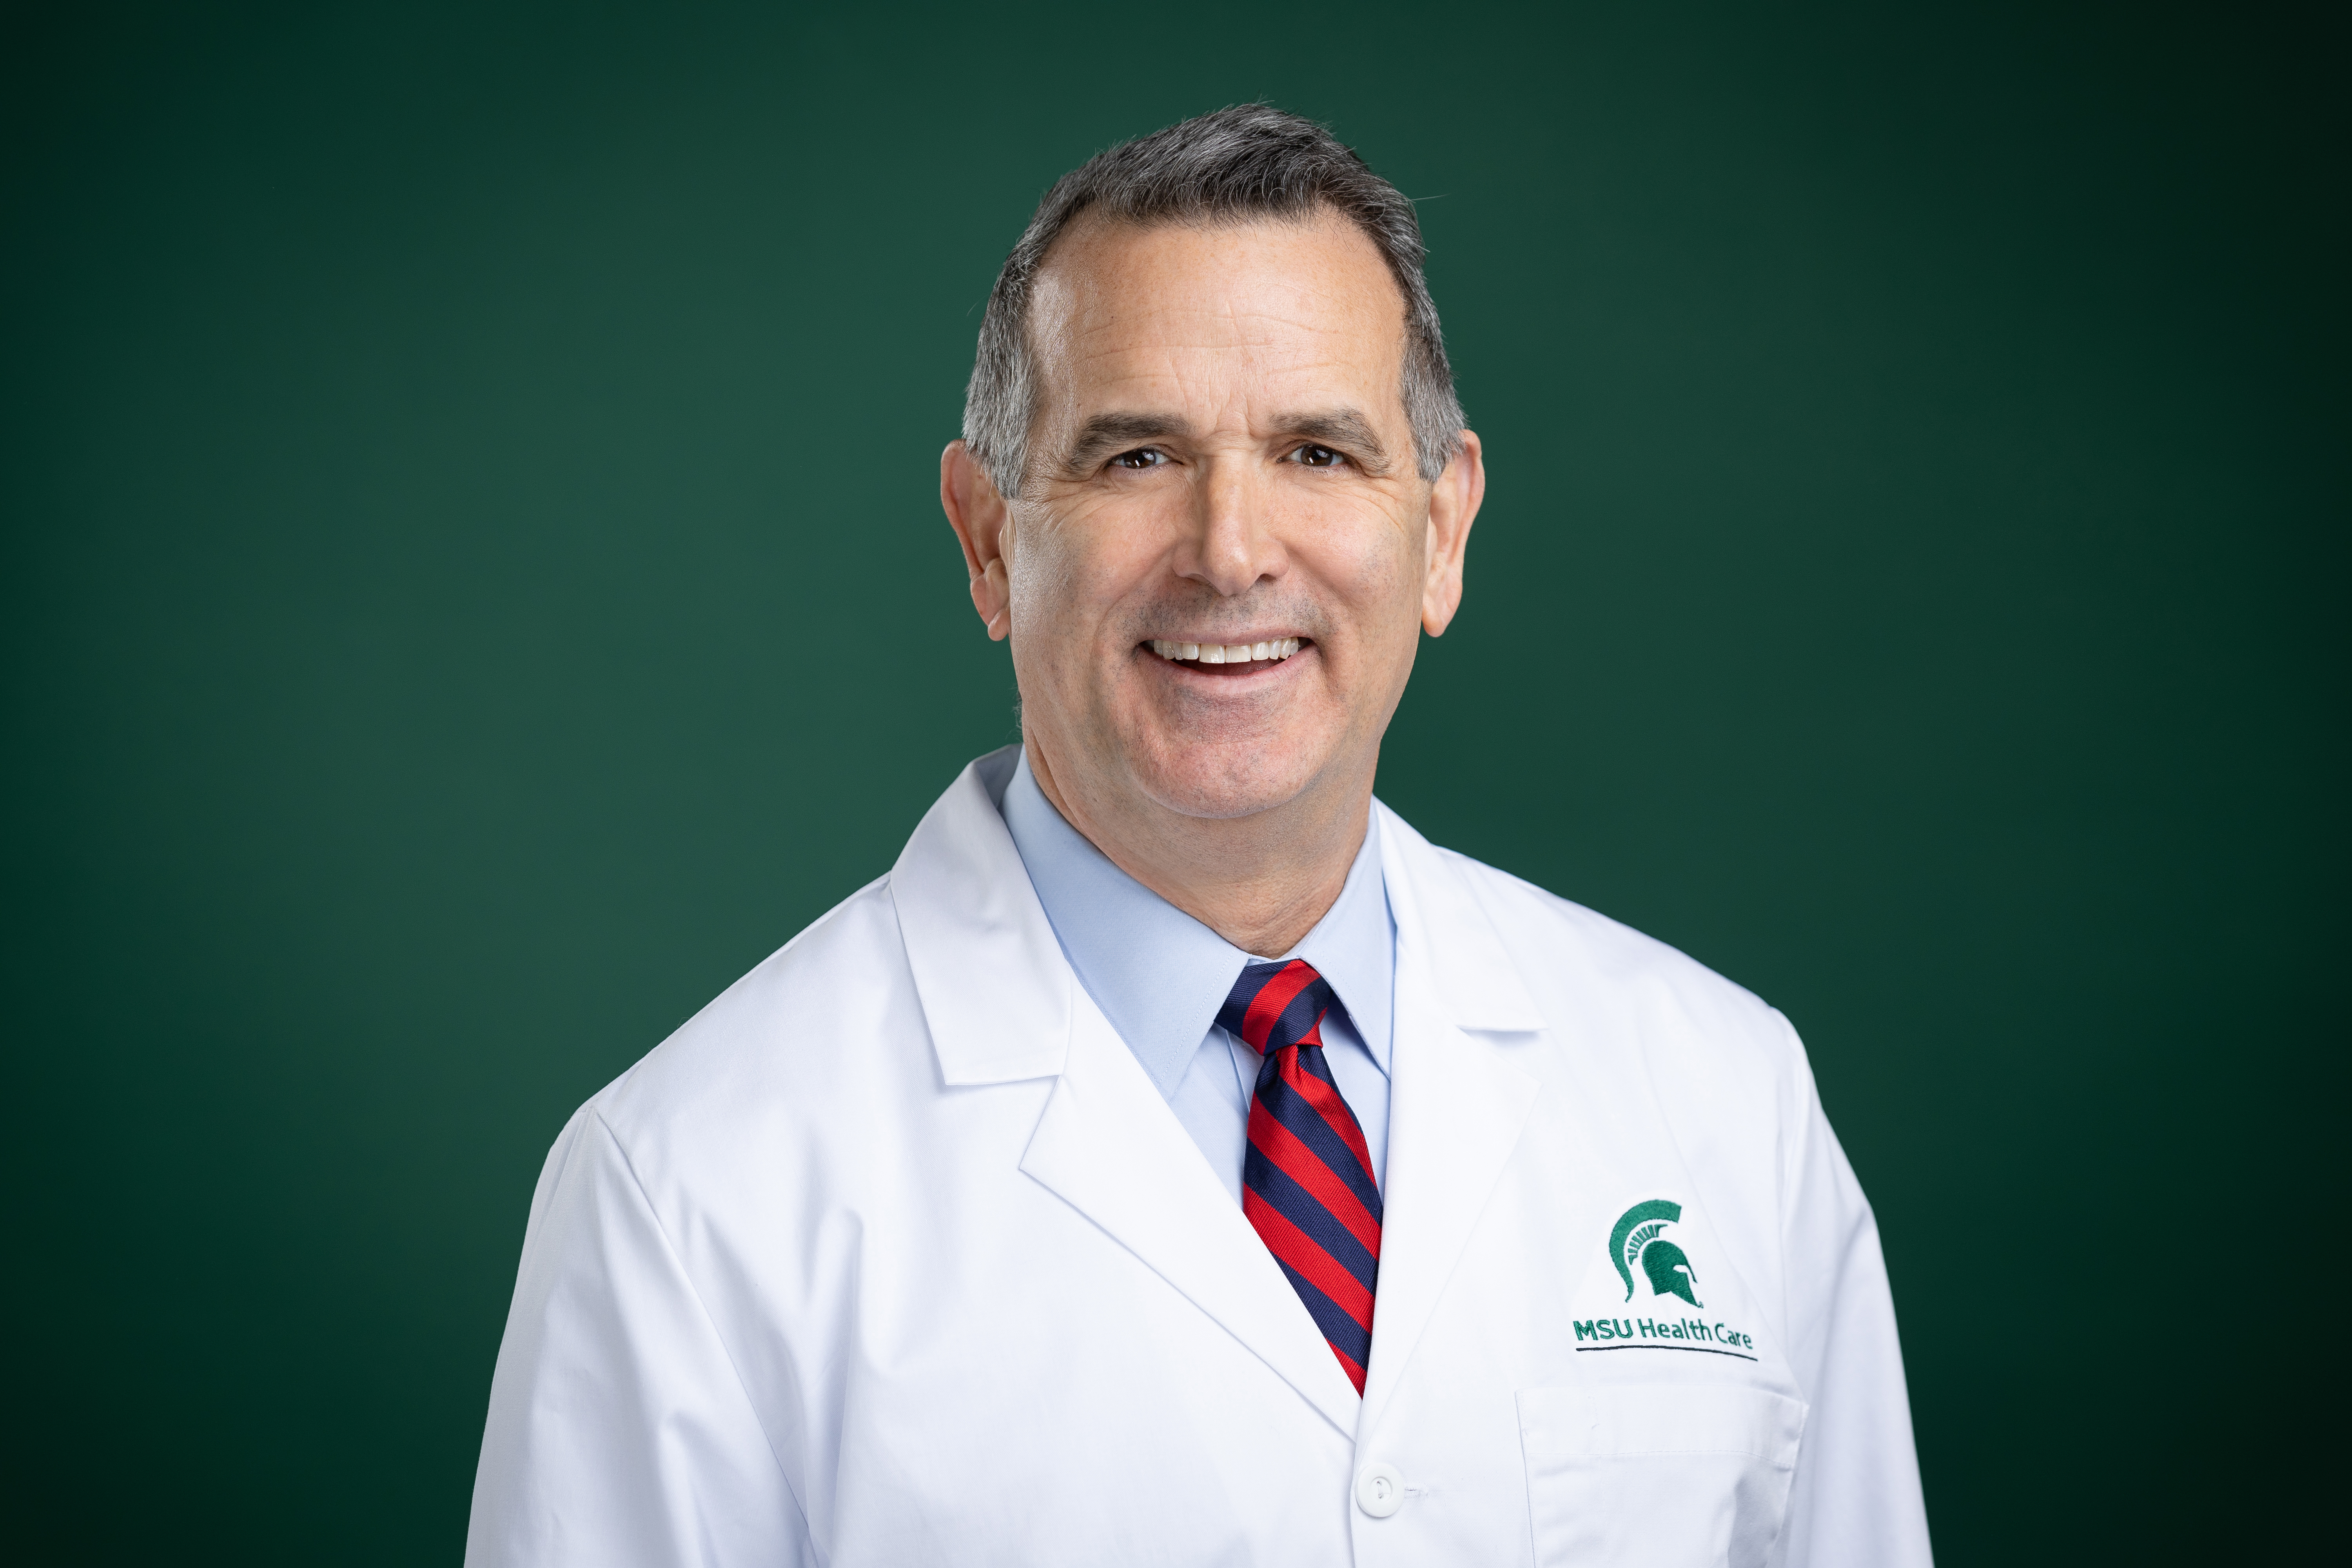 MSU Health Care chief medical officer Dr. Michael Weiner